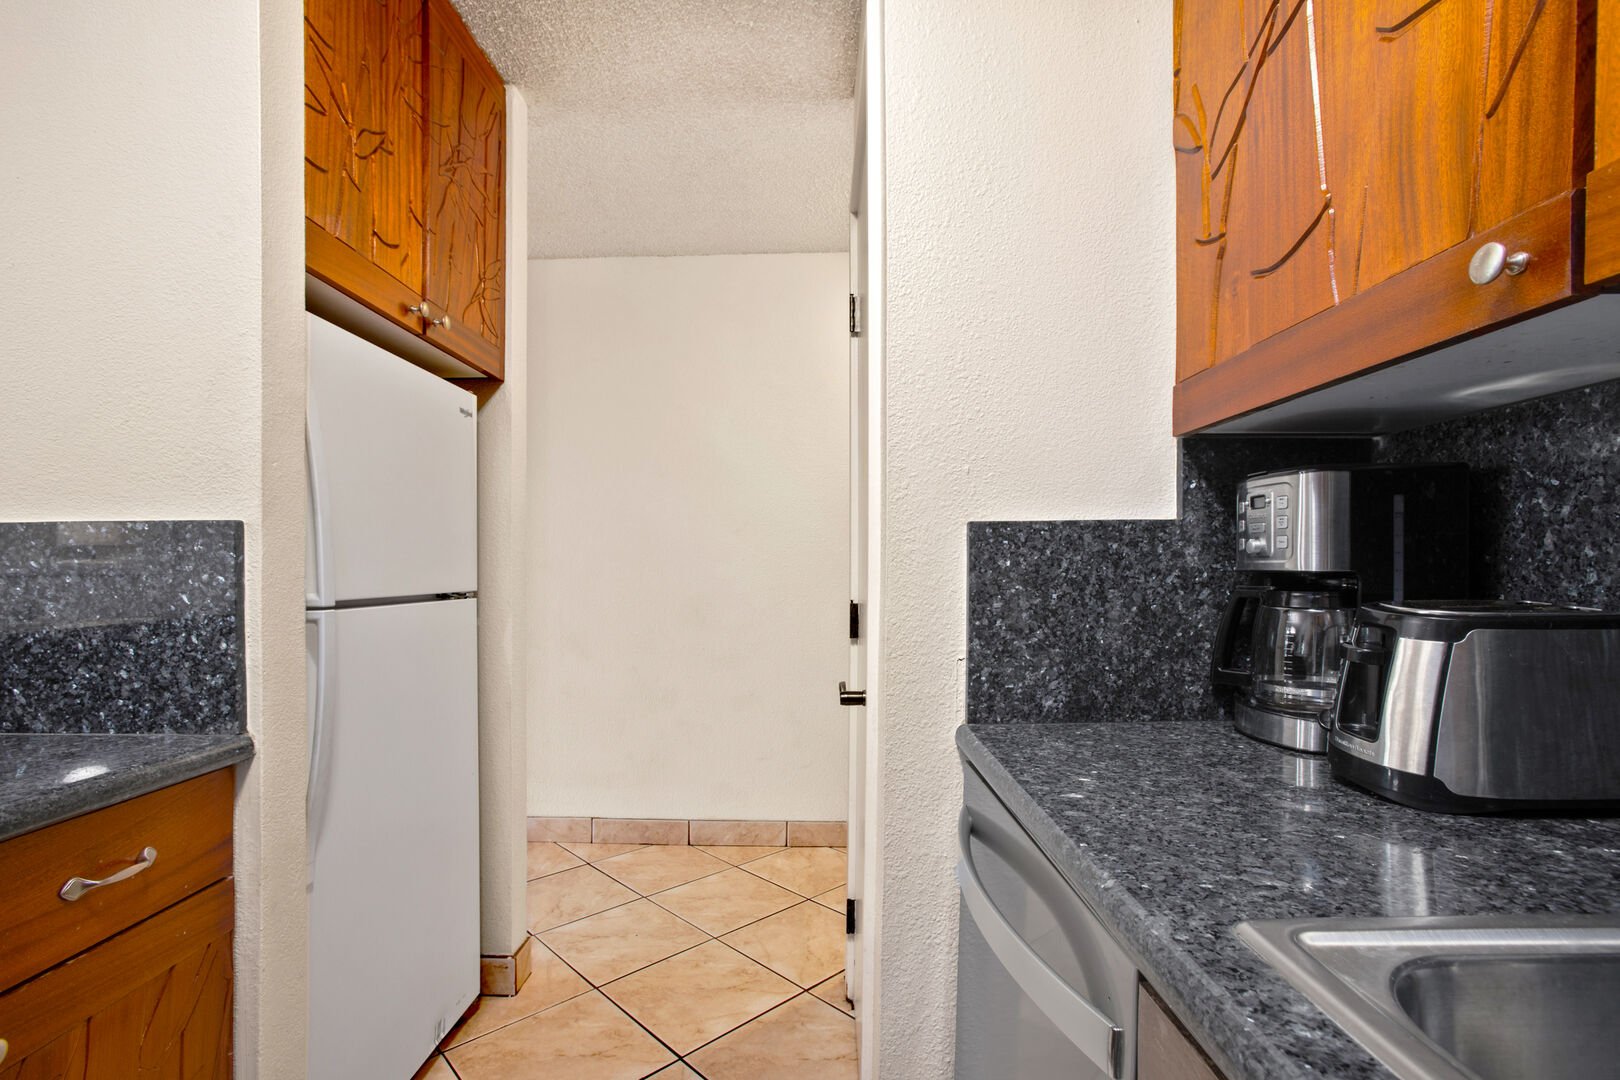 This unit has a fully-equipped kitchen perfect for your culinary needs!